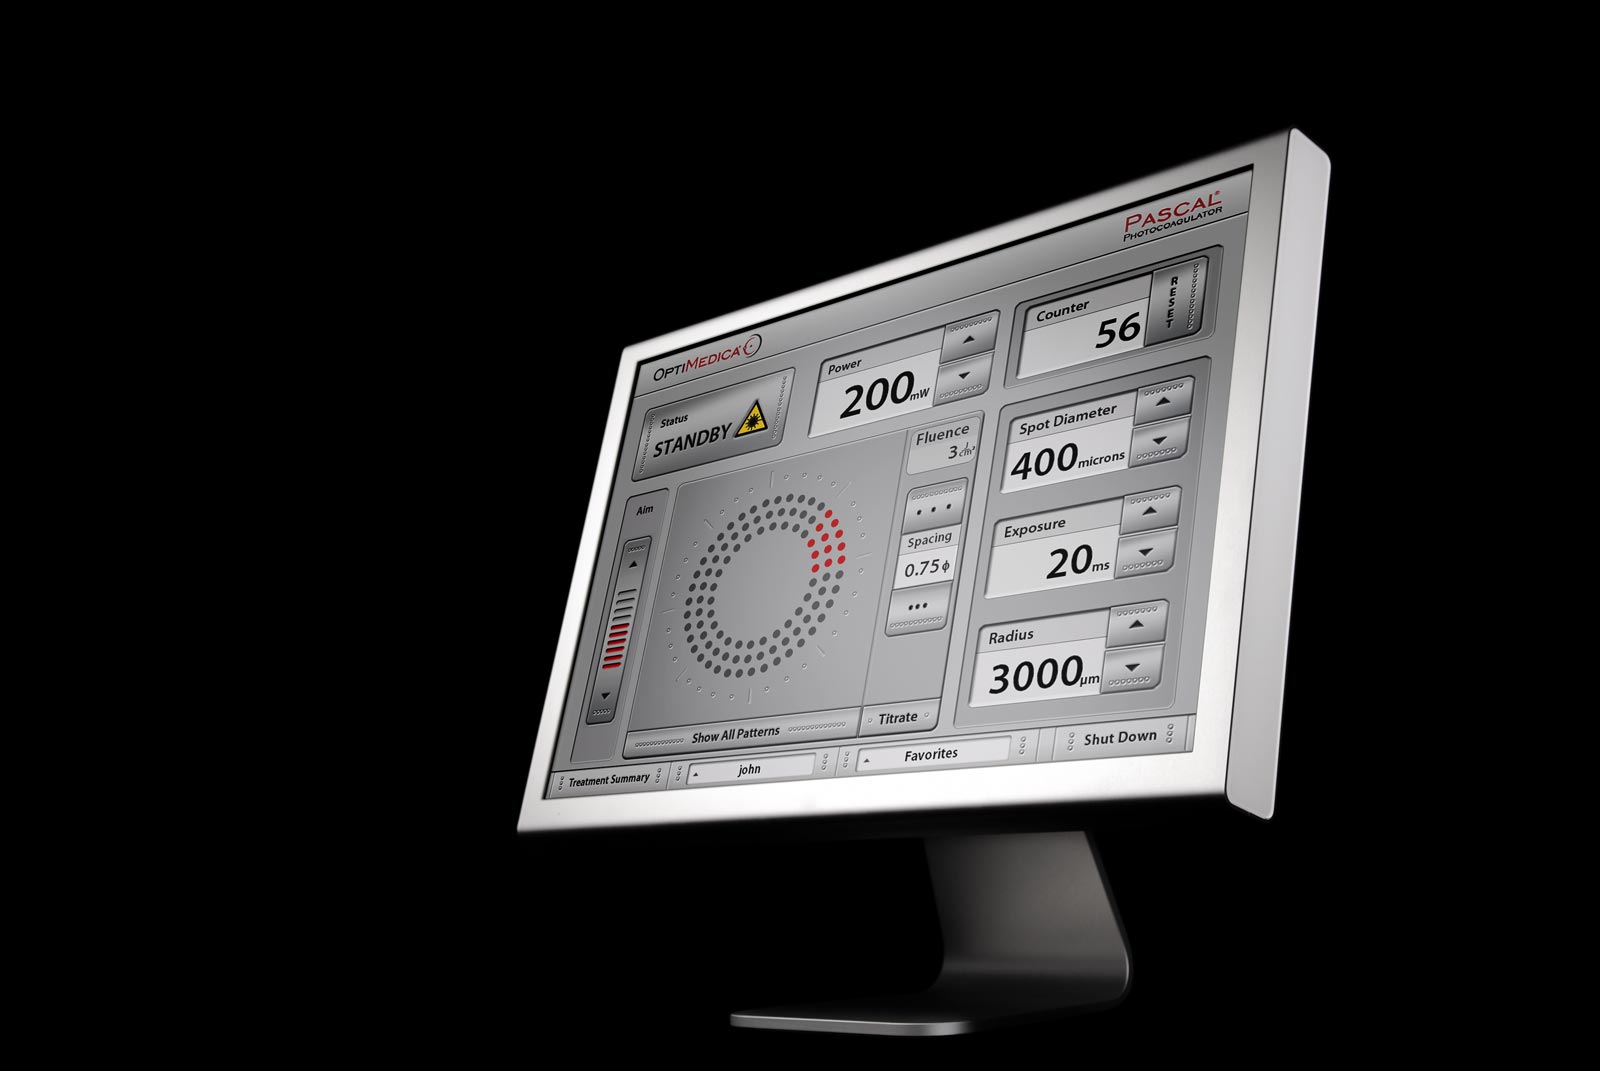 Image of a touch screen monitor whcih sows the user interface of the Pascal Photocoagulator.